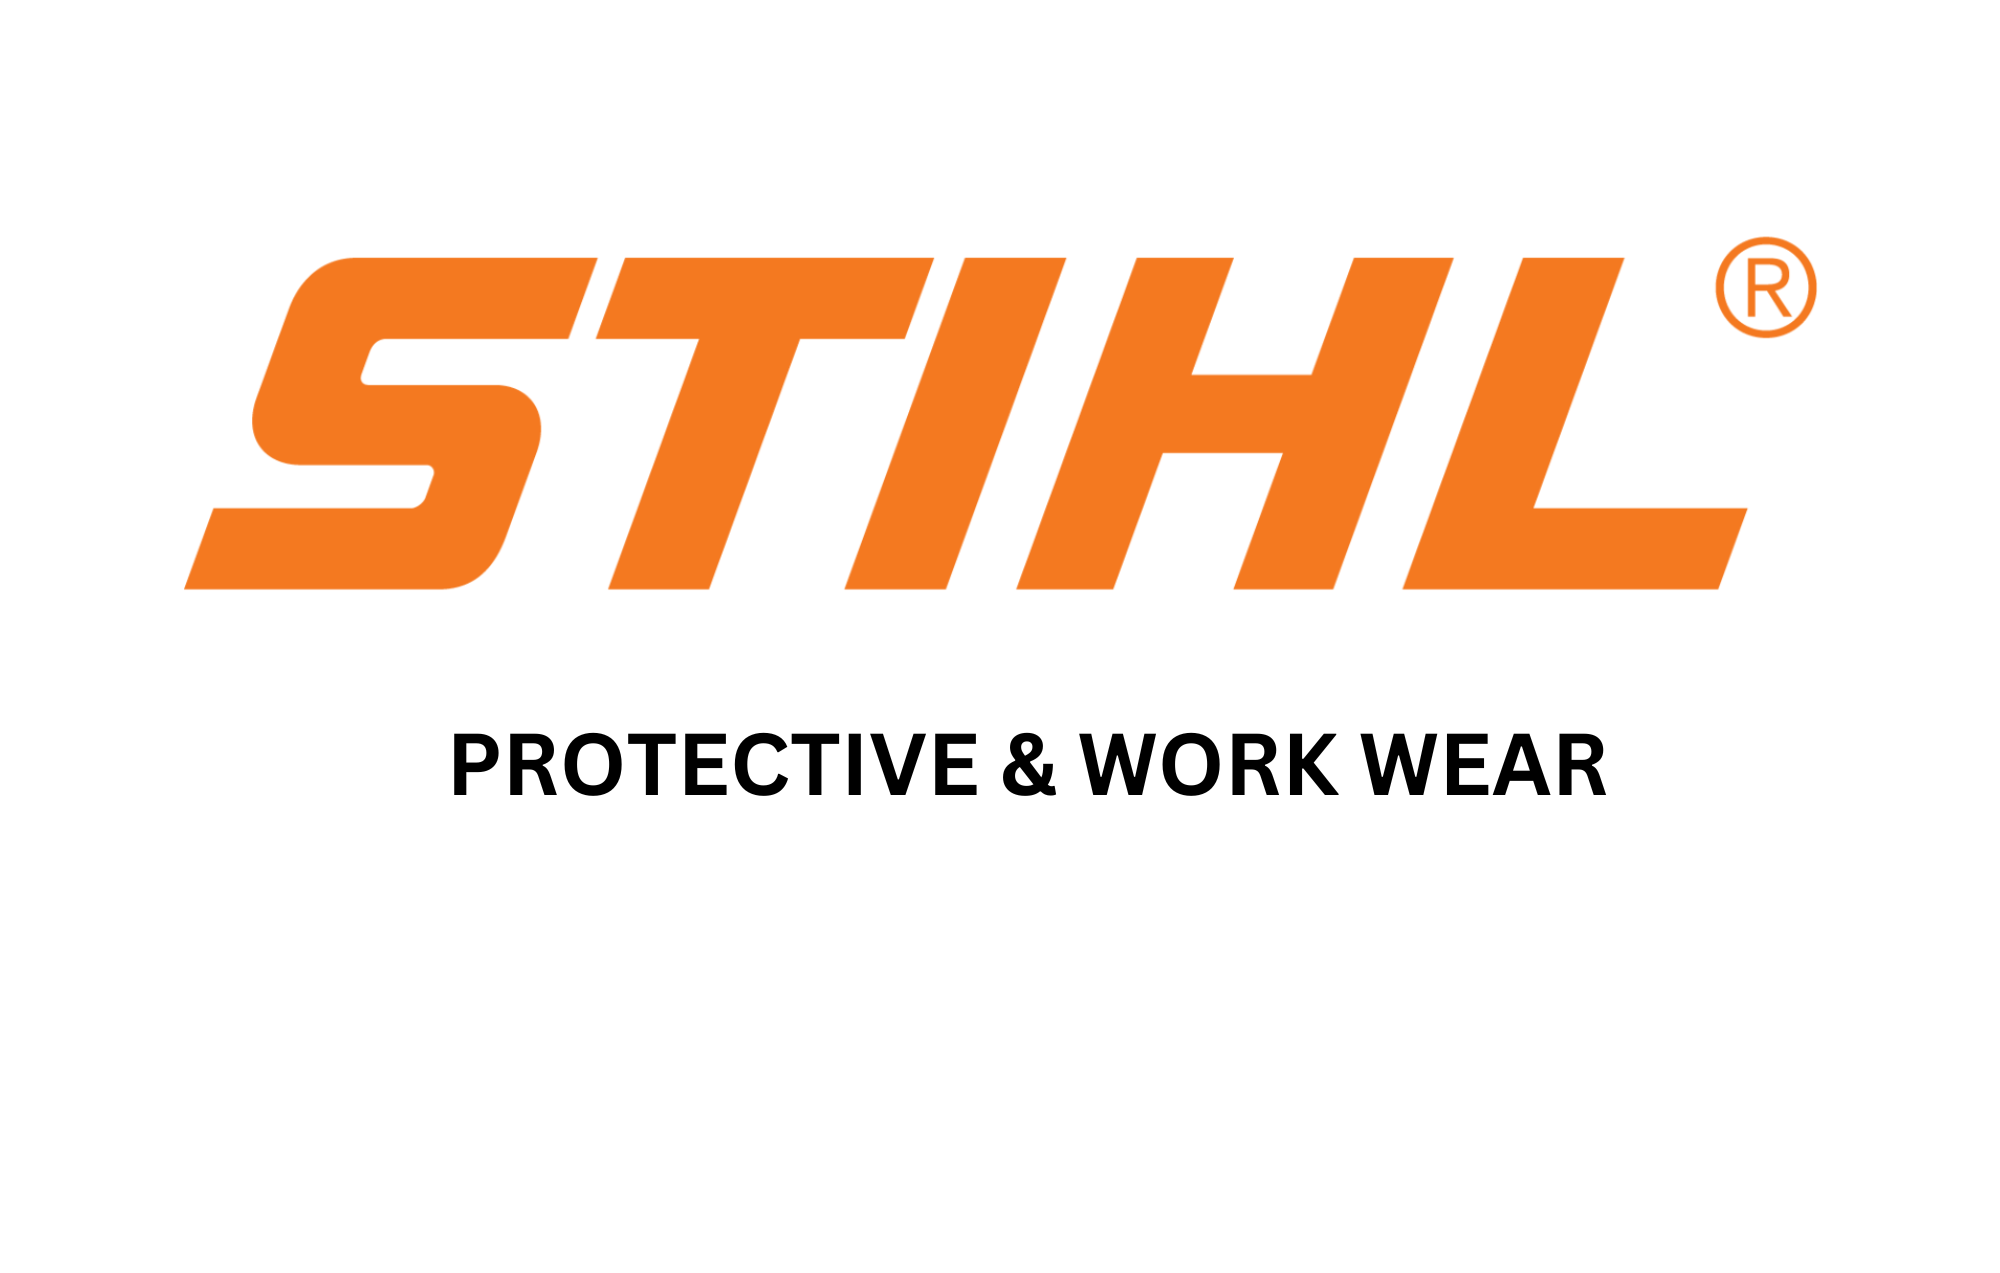 Protective & Work Wear